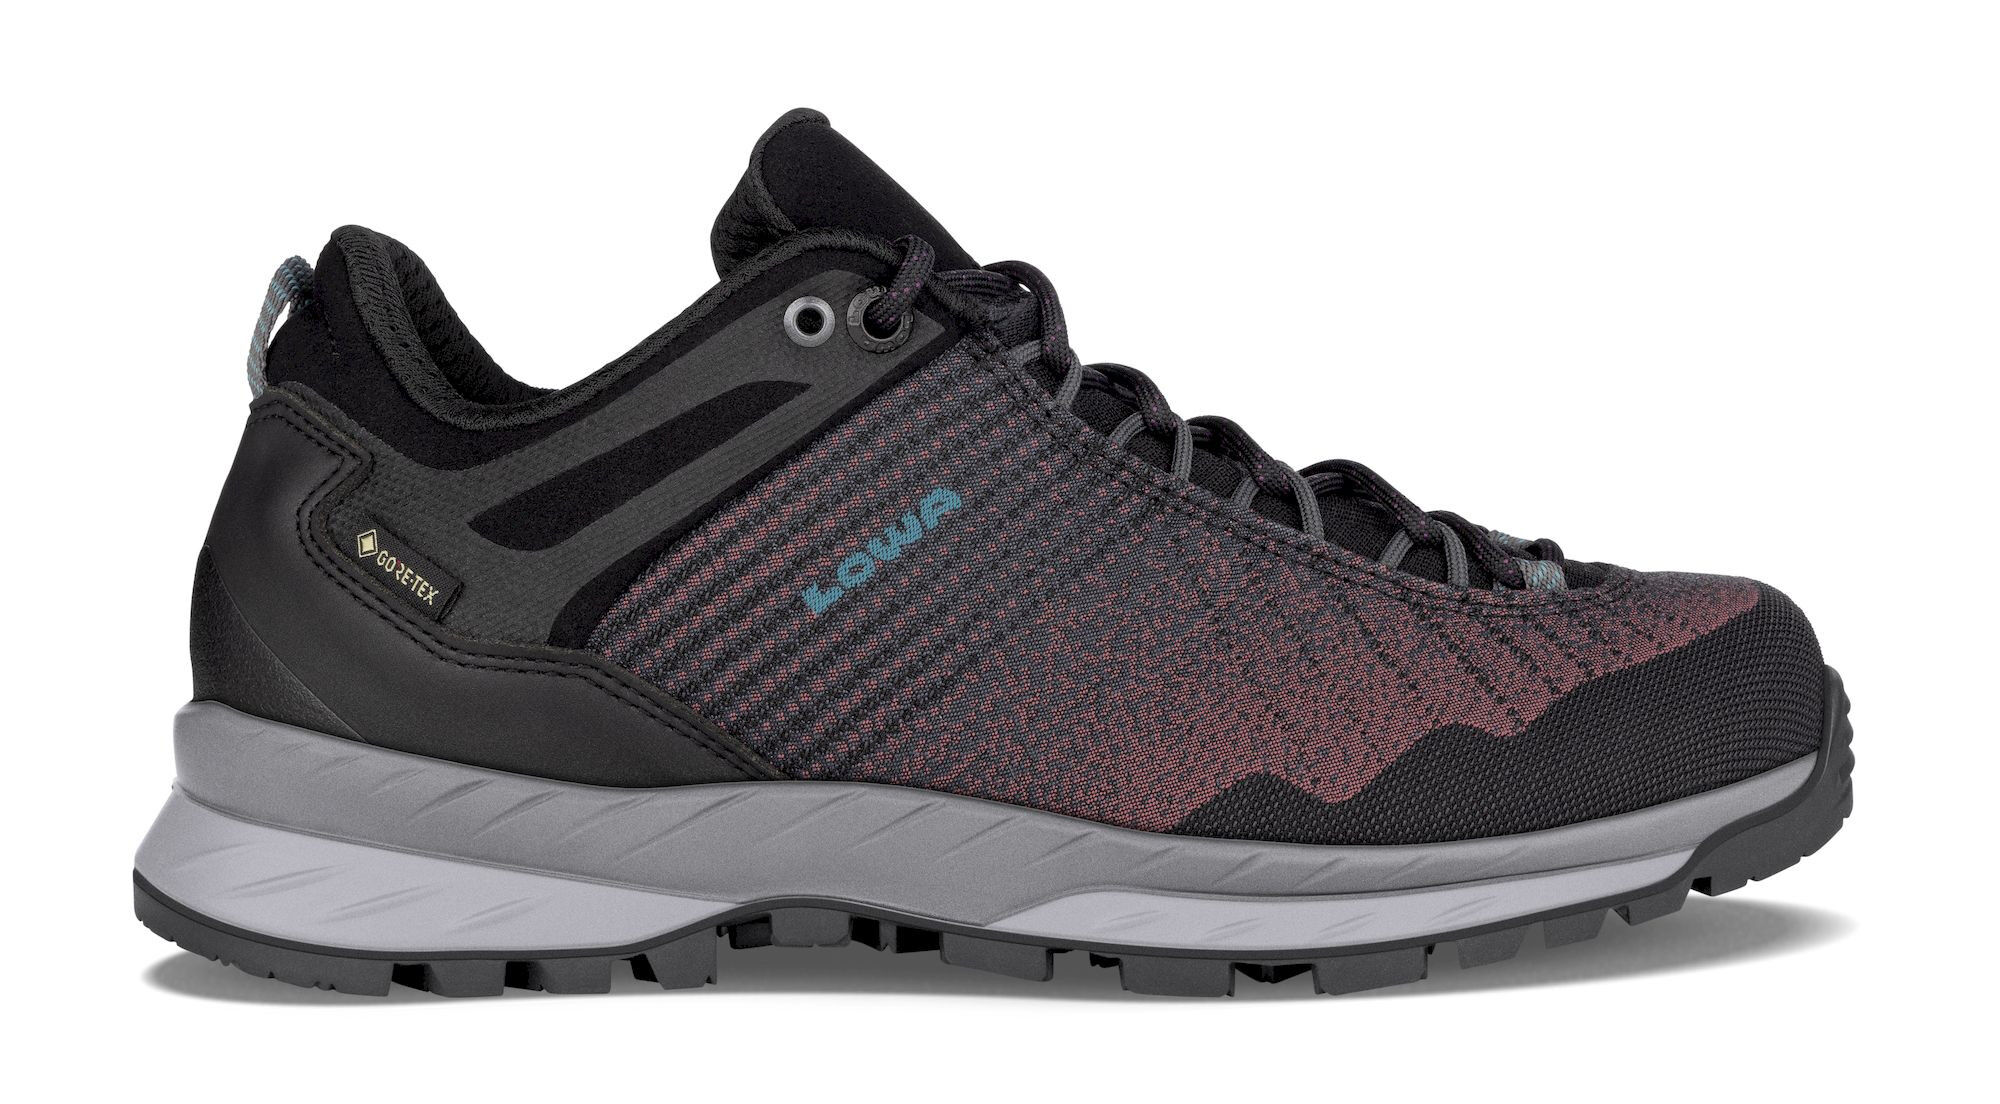 Lowa Carezza GTX Lo - Chaussures approche femme | Hardloop